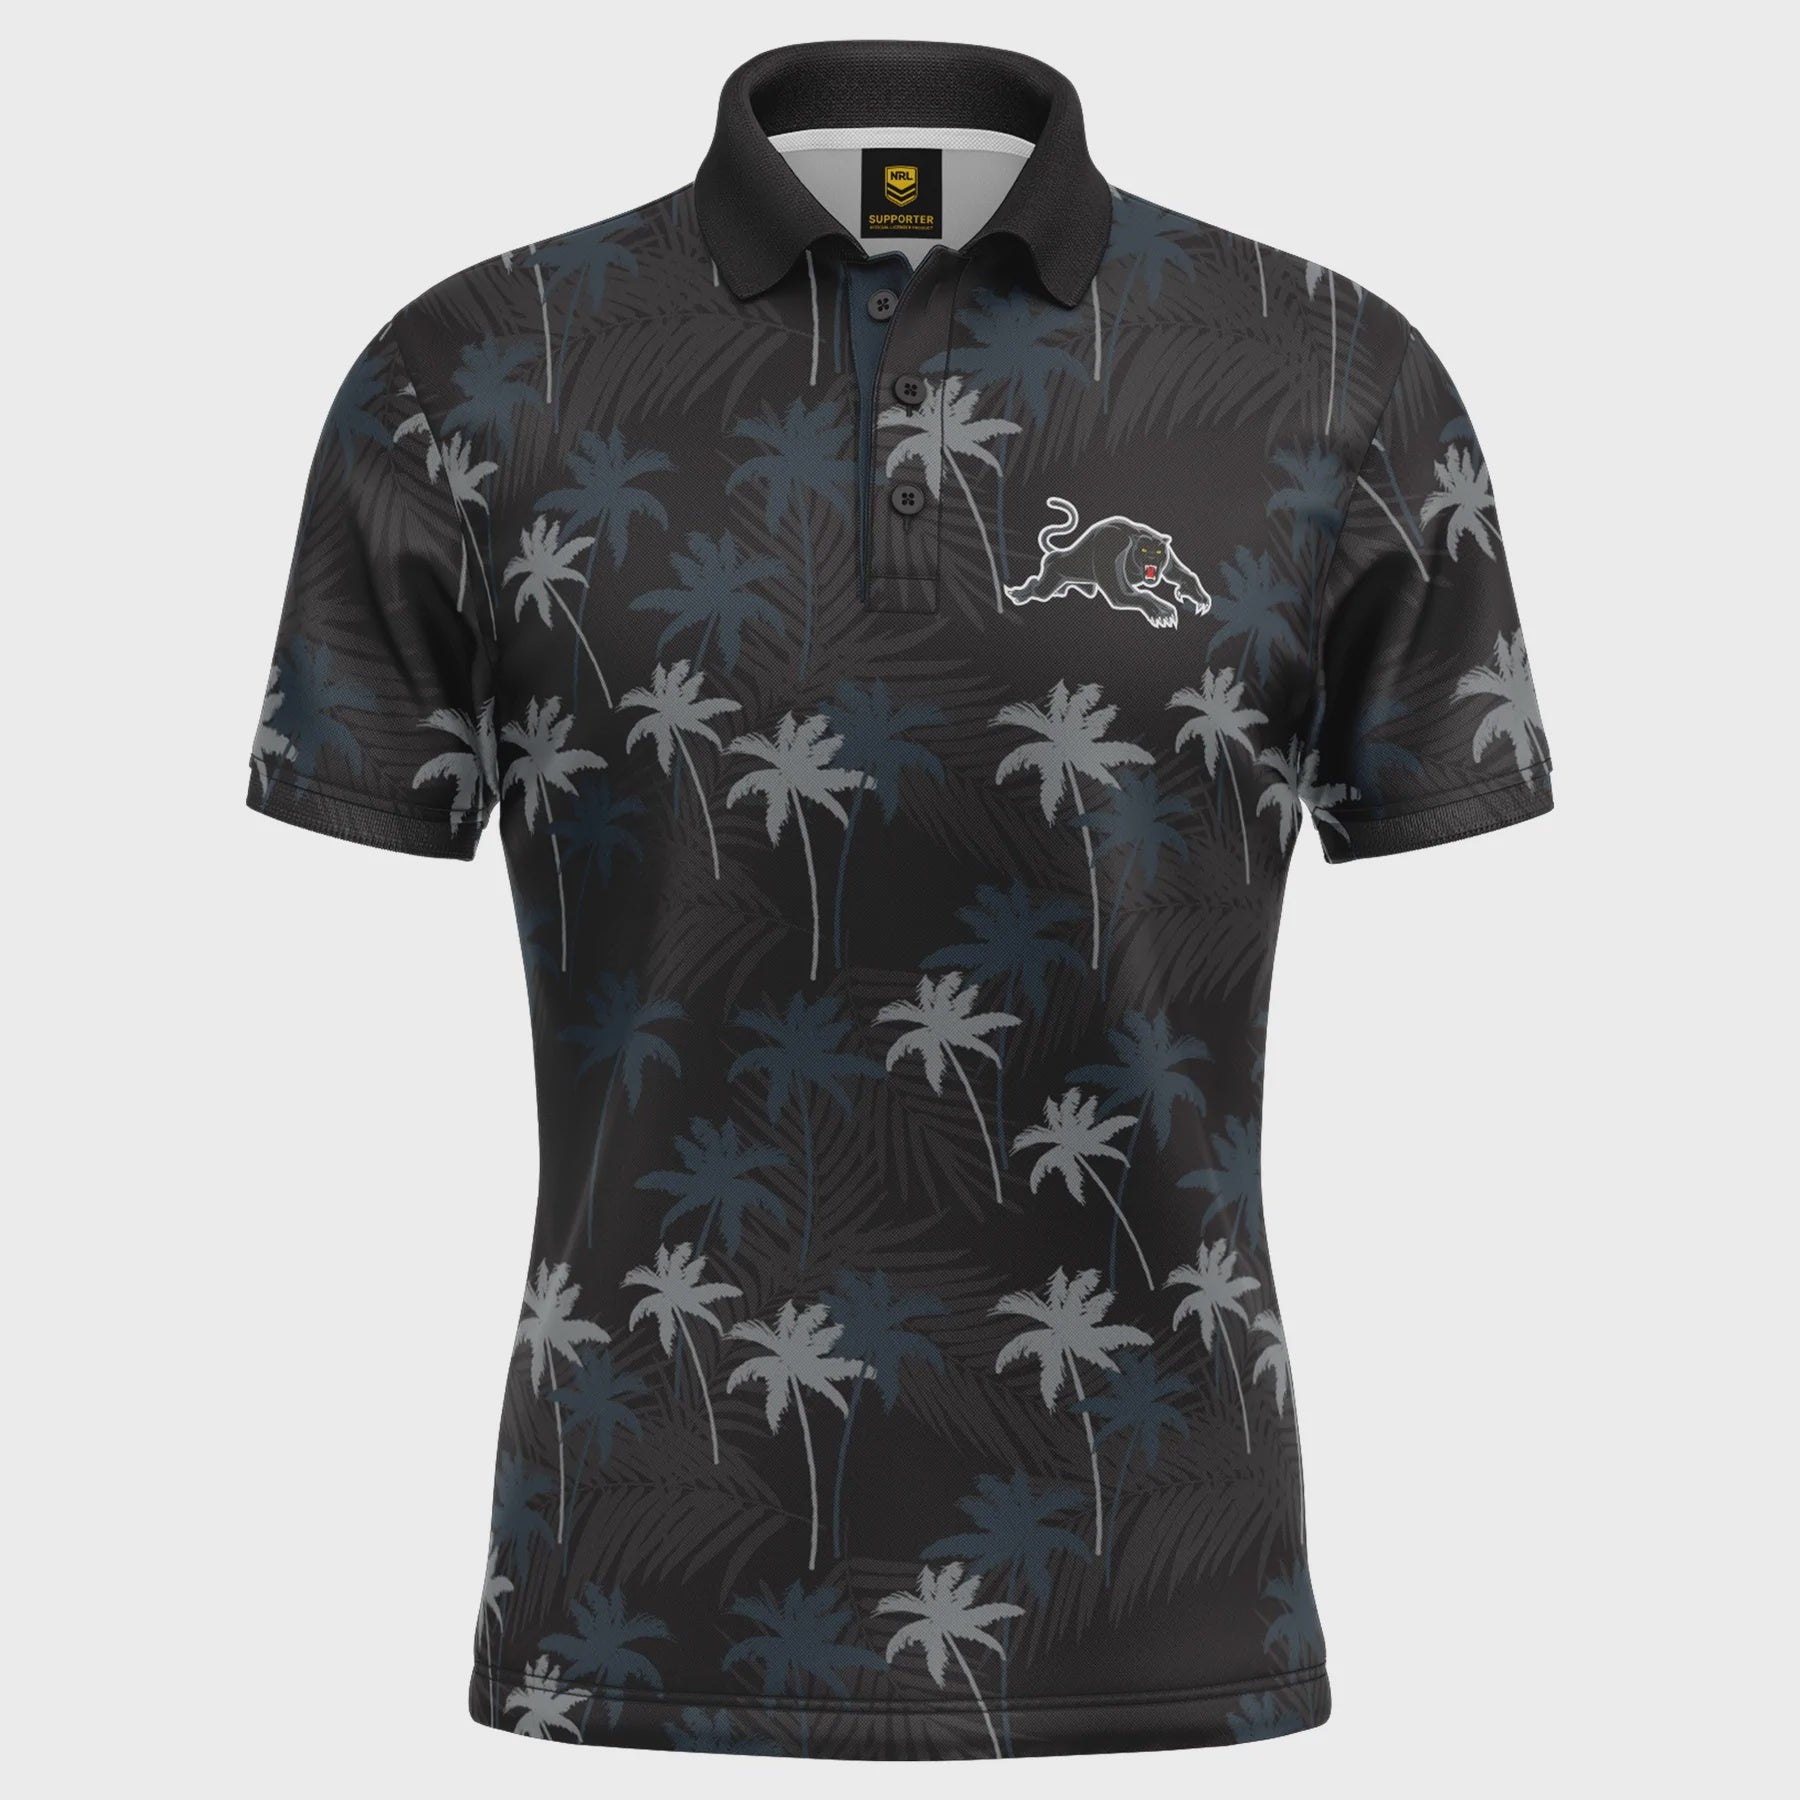 Panthers 'Par-Tee' Golf Polo - The Rugby Shop Darwin